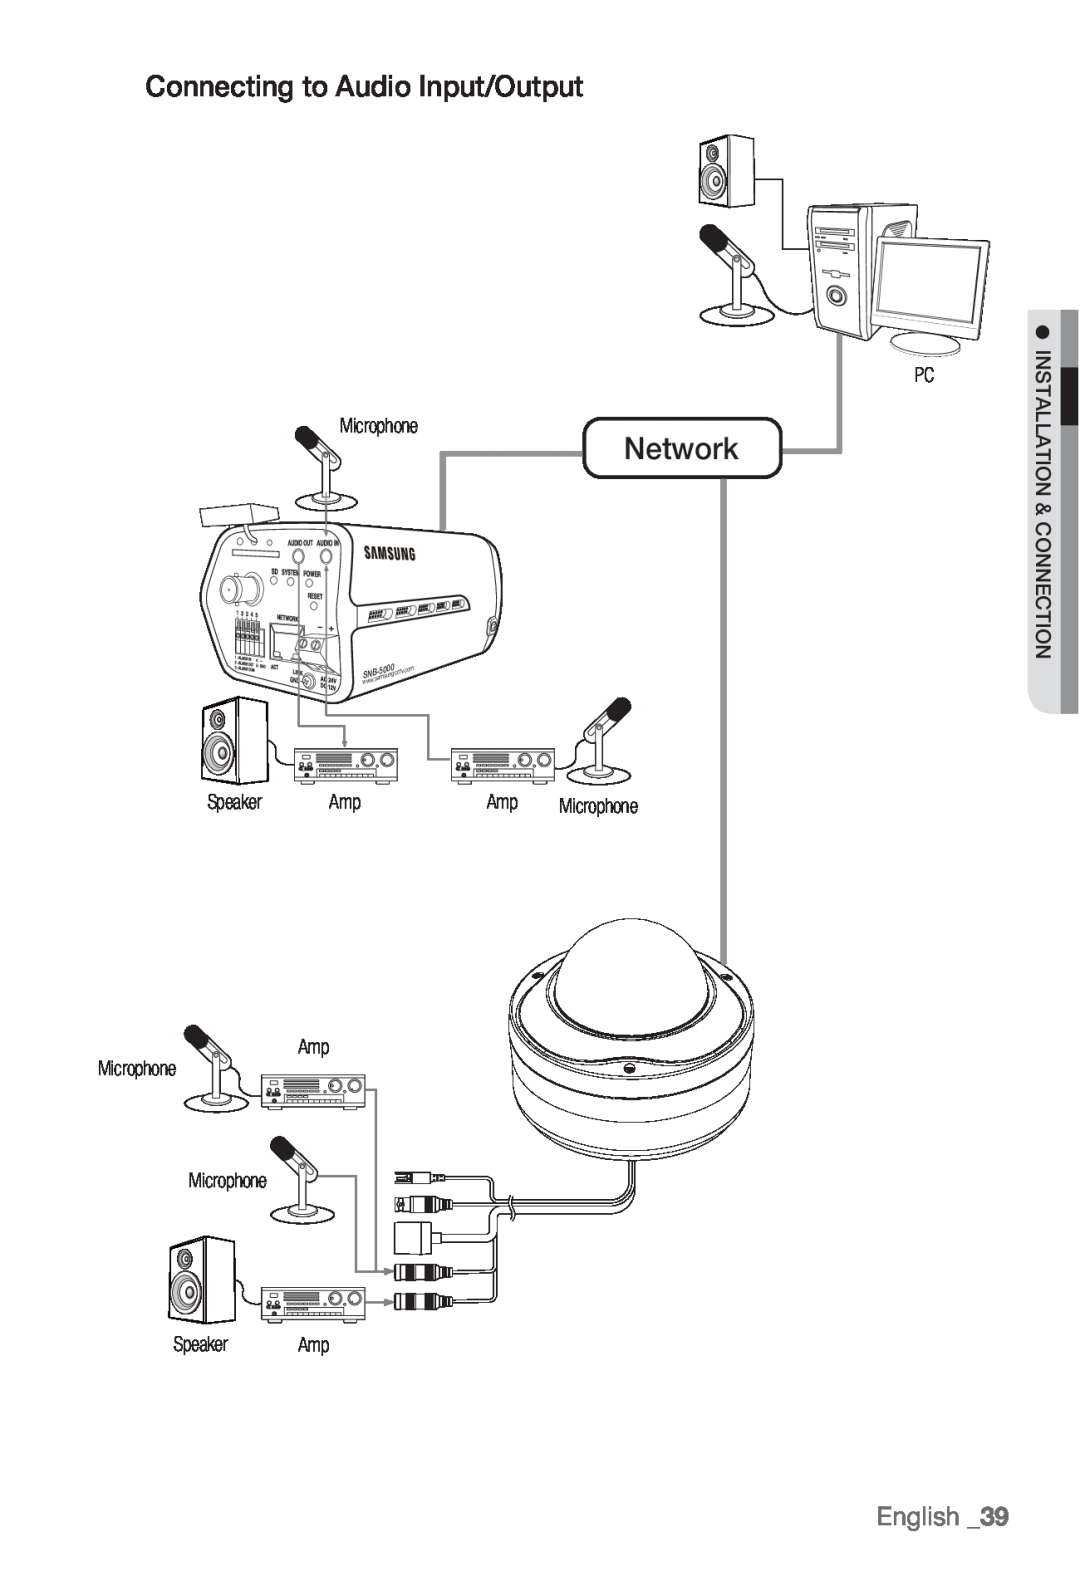 Samsung SNB5000, SNV-5080, SNB-5000, SND-5080F user manual Network, Connecting to Audio Input/Output, English 